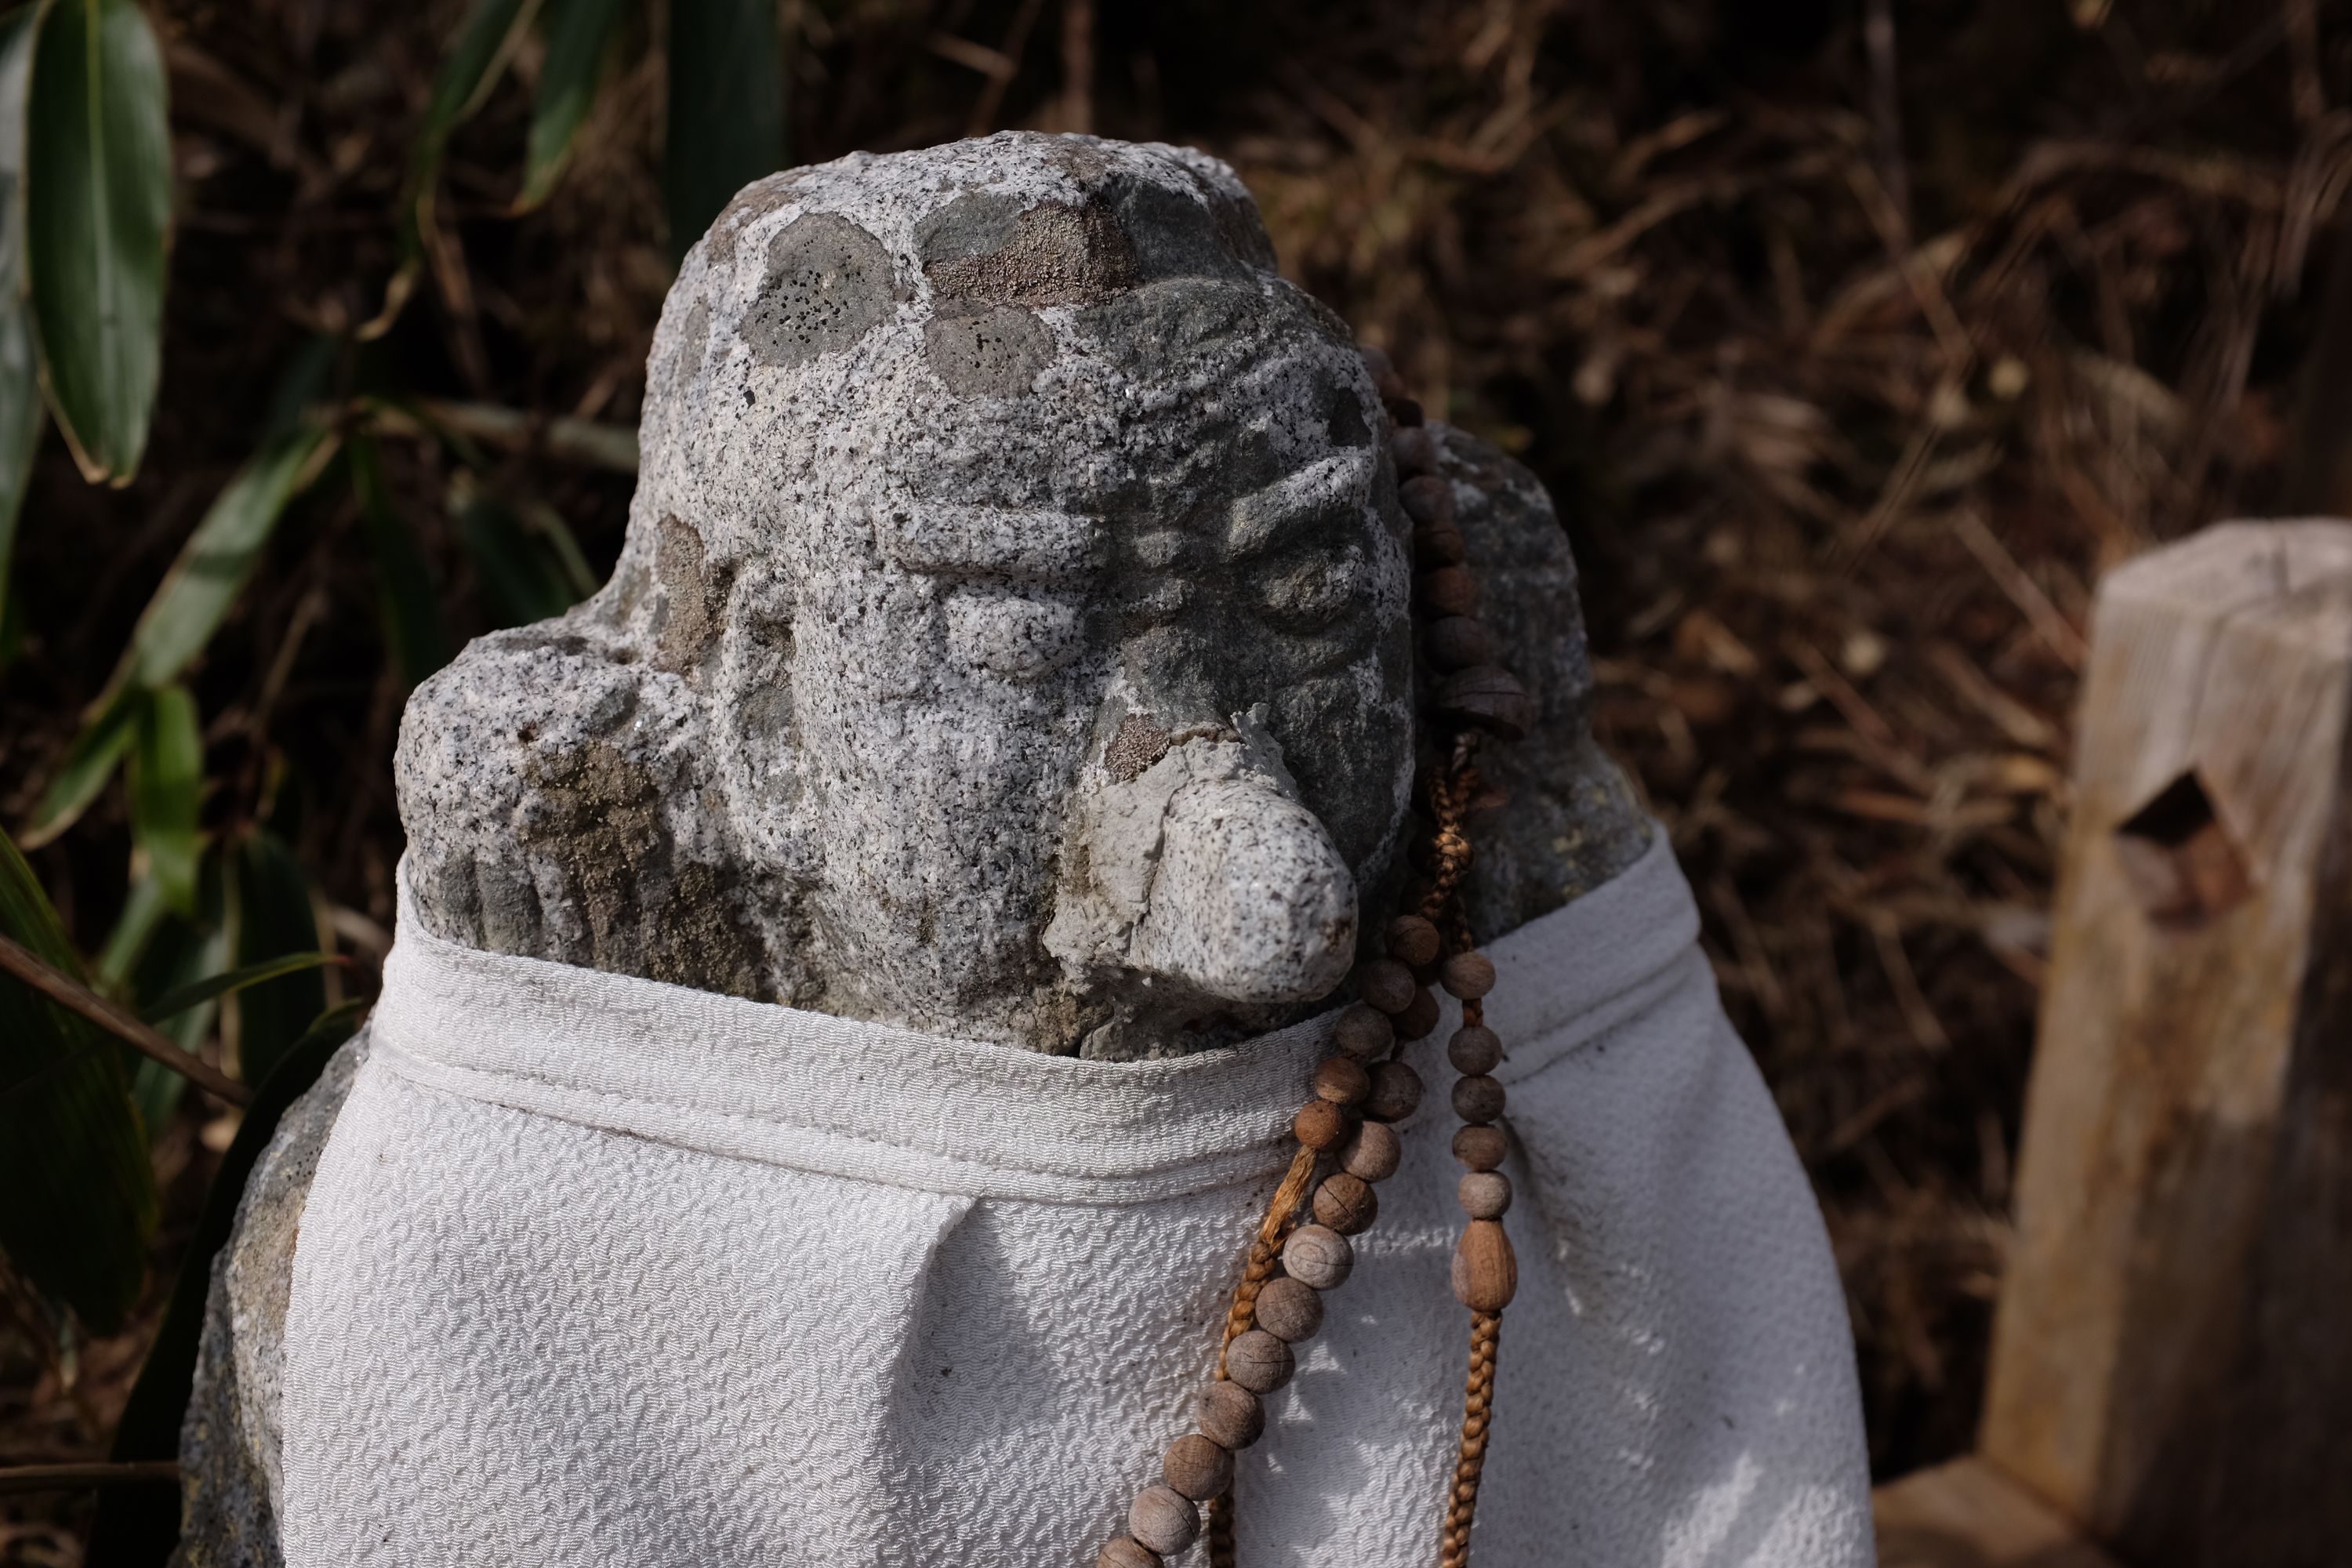 A small statue of a mountain deity with a huge nose and bulging eyes wears a white apron and a necklace of beads.